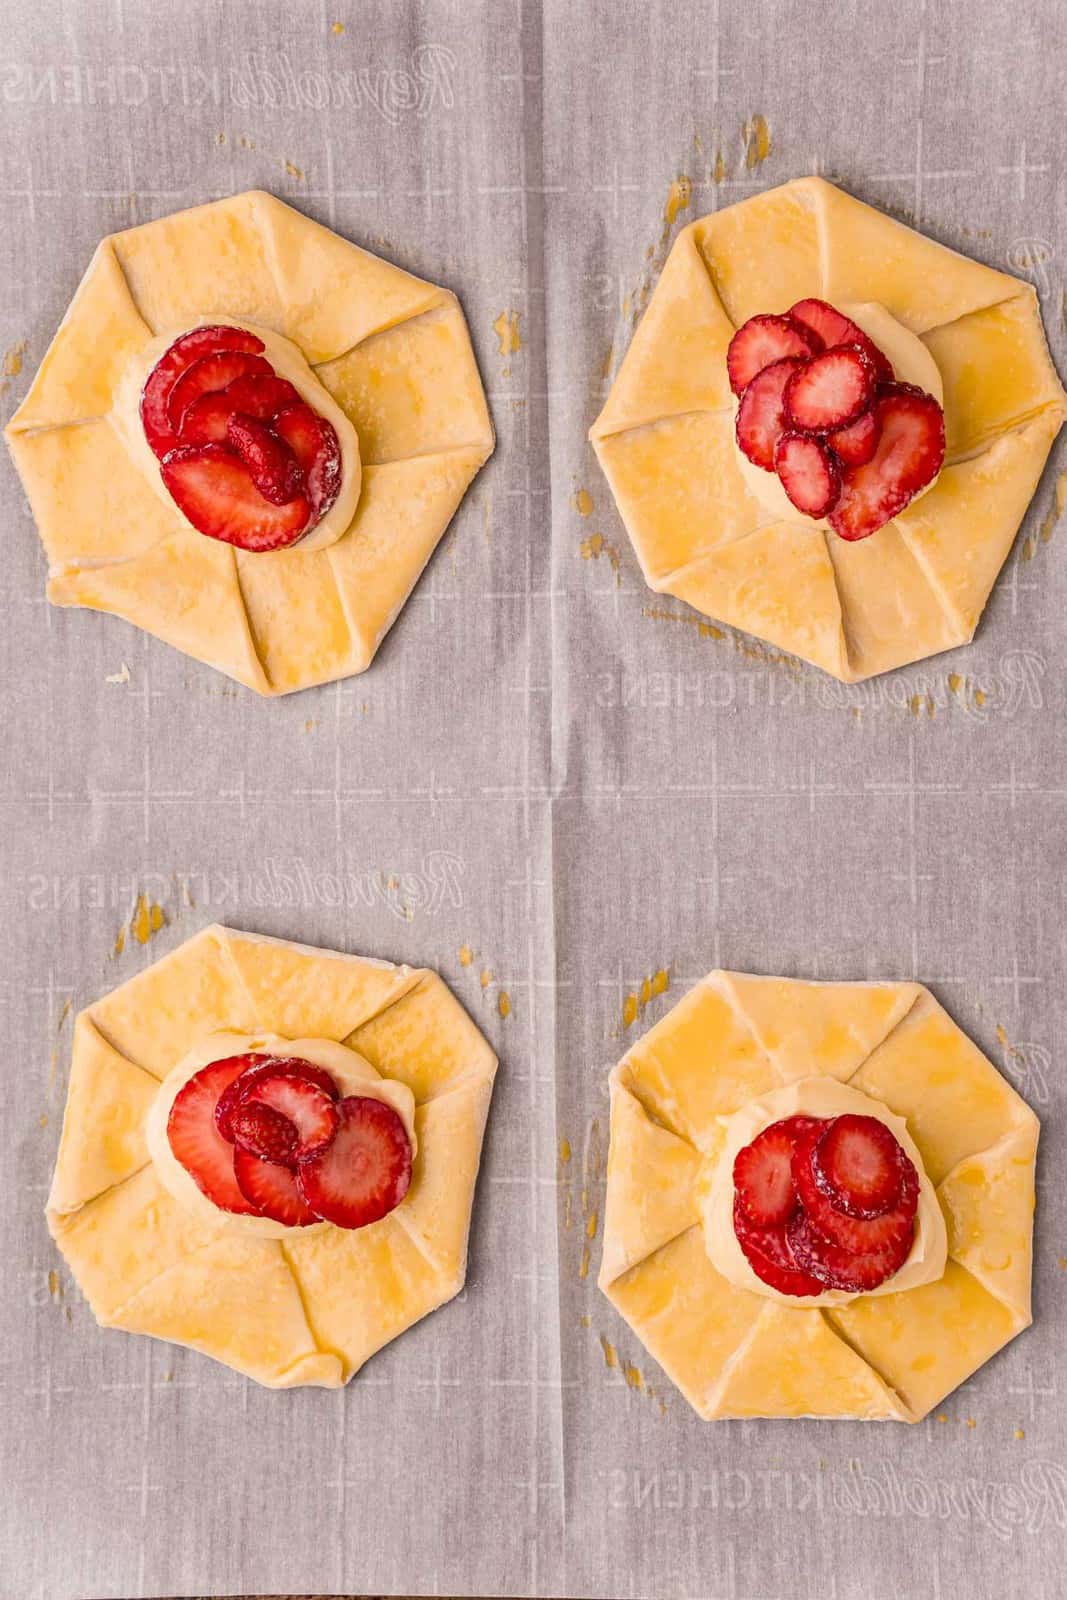 Unbaked danishes topped with strawberries and cream cheese mixture on parchment paper lined baking sheet